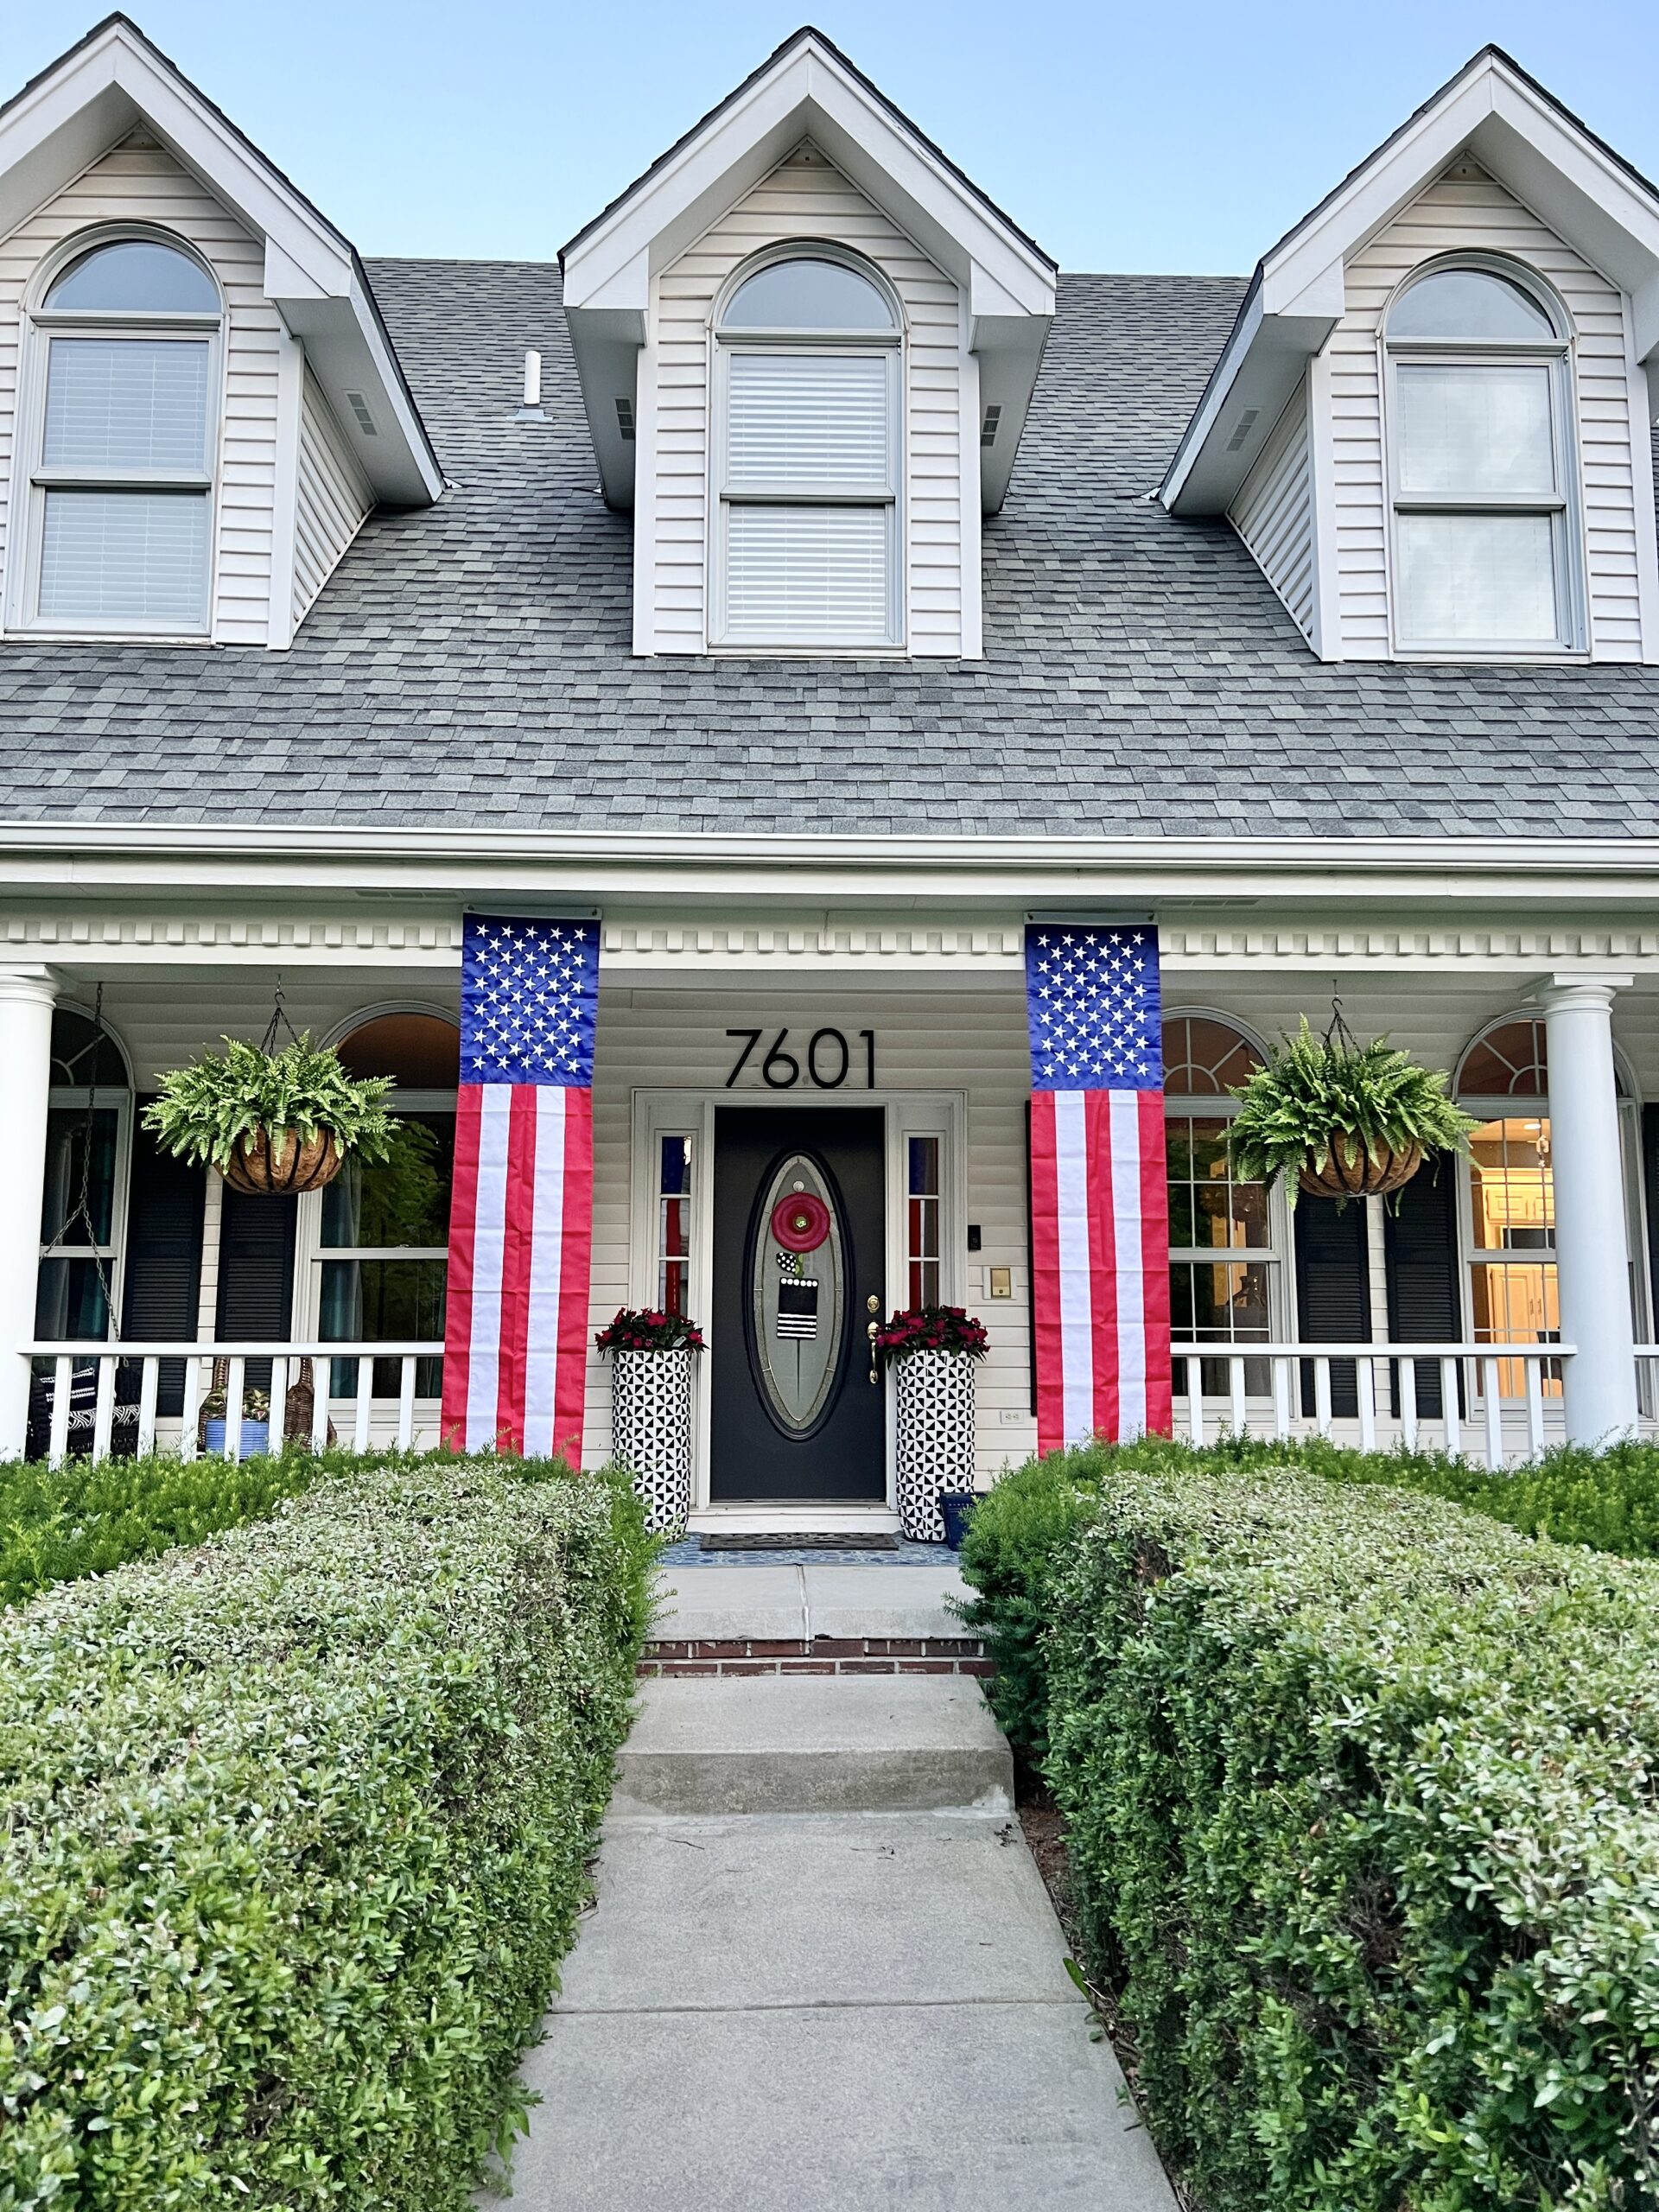 7 Simple Ways to Decorate Your Porch for July 4th